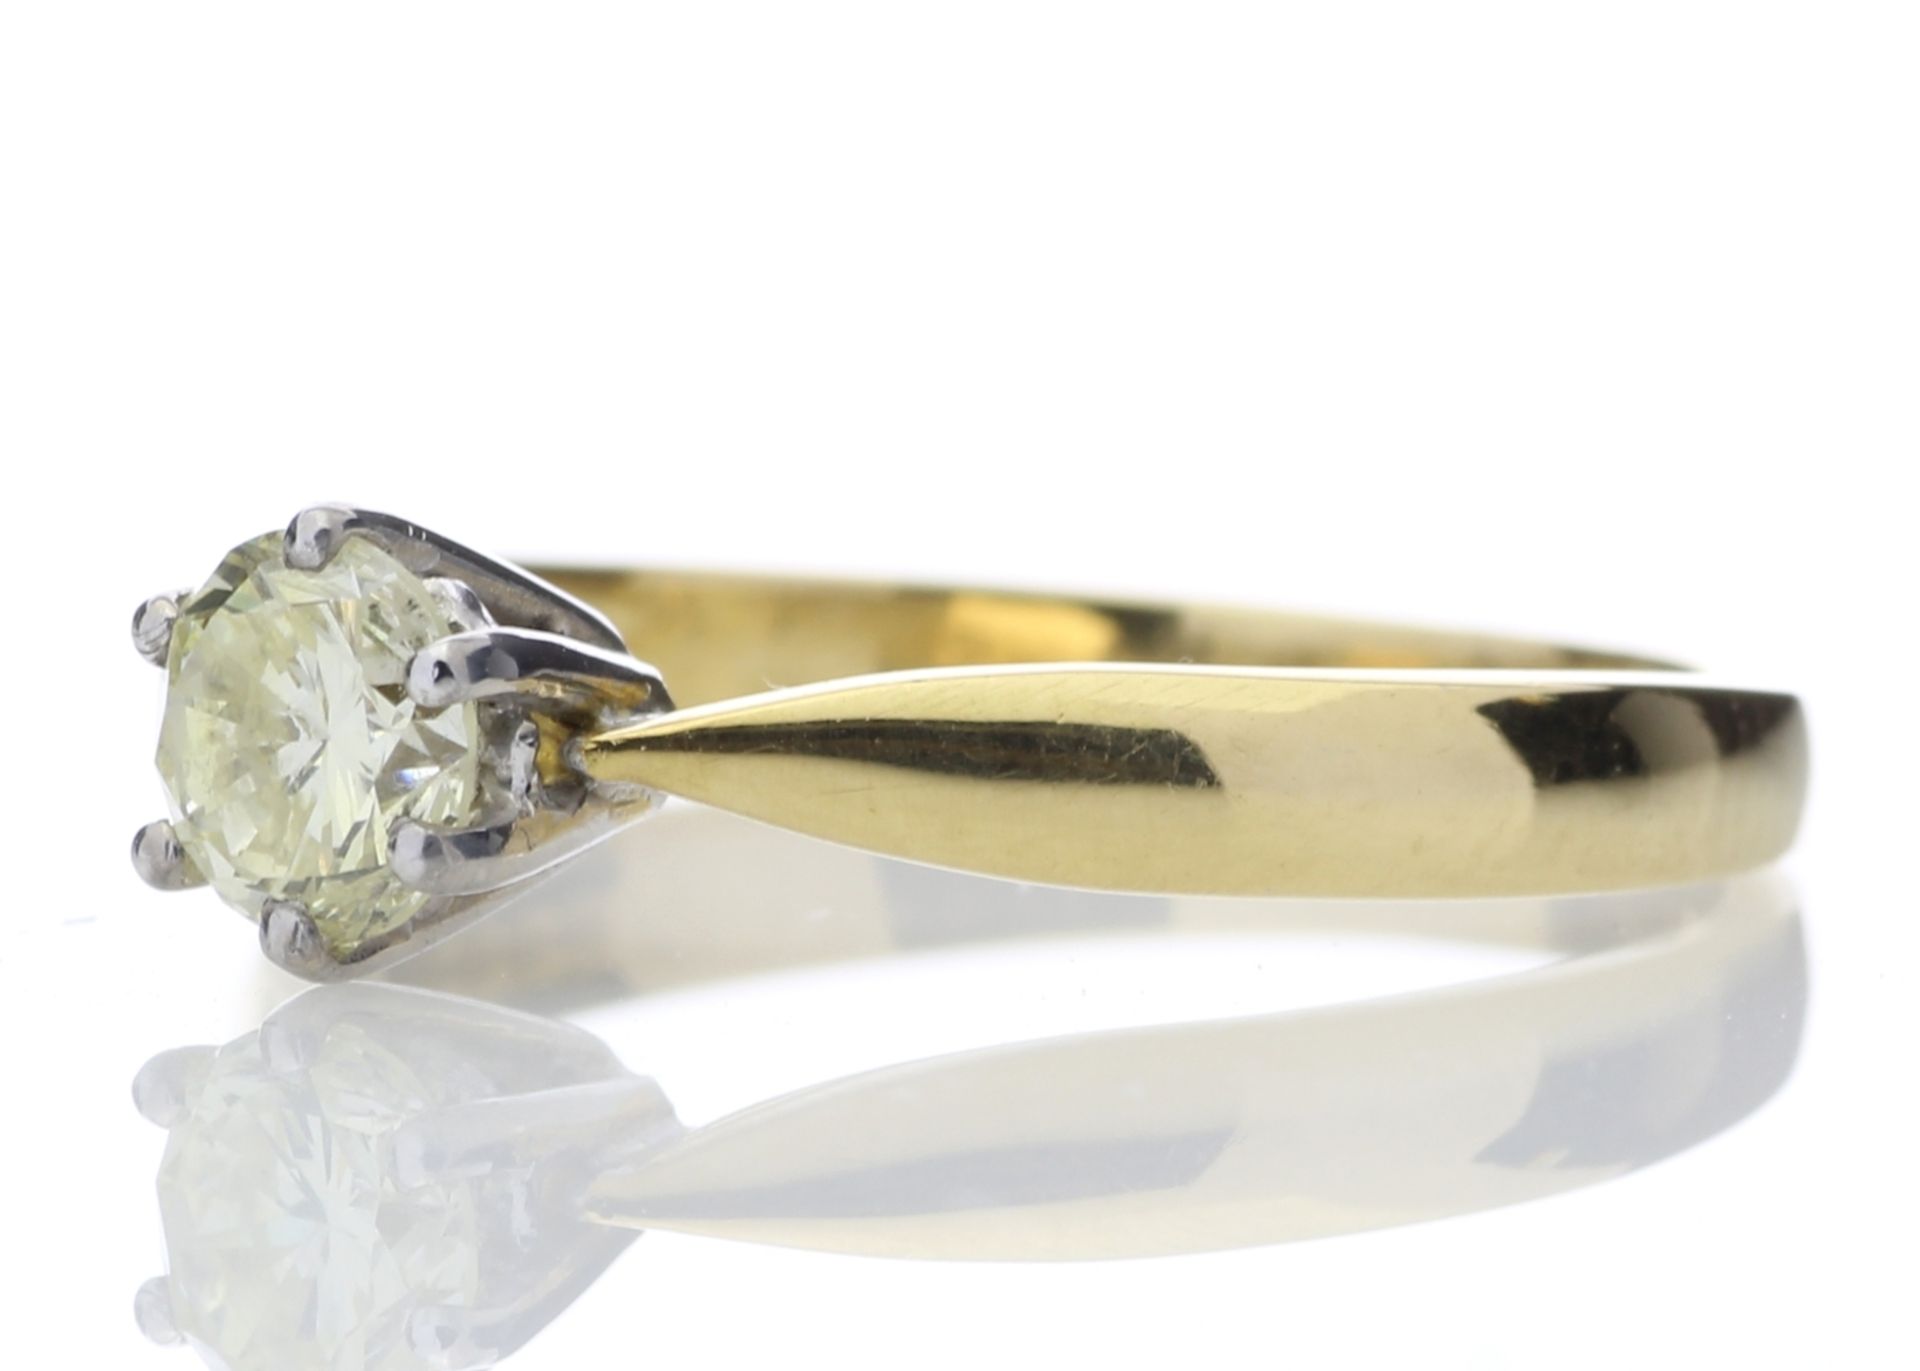 18ct Single Stone Fancy Yellow Diamond Ring 0.56 Carats - Valued By AGI £6,120.00 - A gorgeous - Image 2 of 5